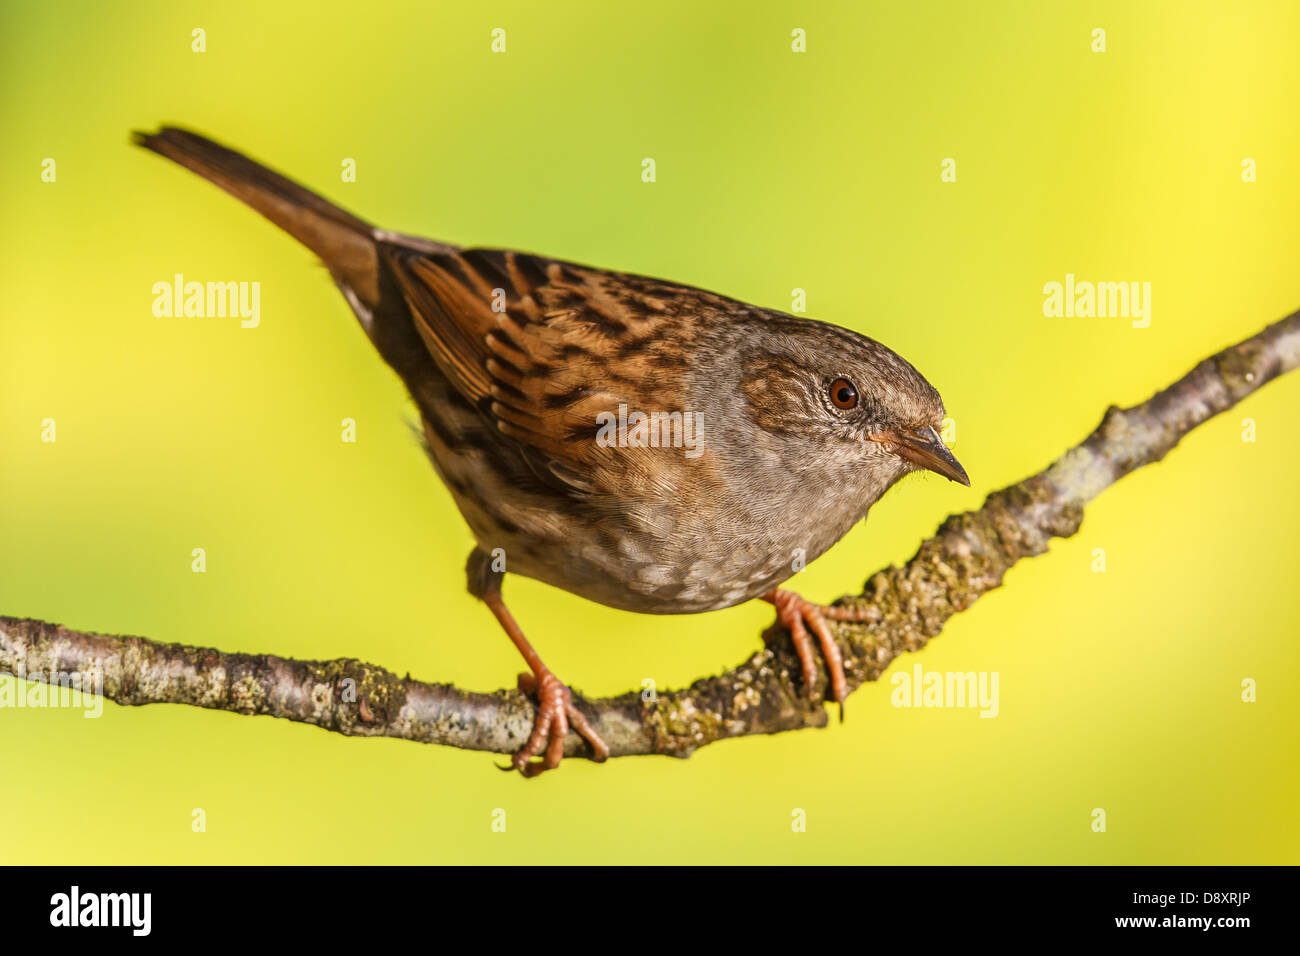 Dunnock, Prunella modularis on a branch. Shallow depth of field and bakground blurred Stock Photo